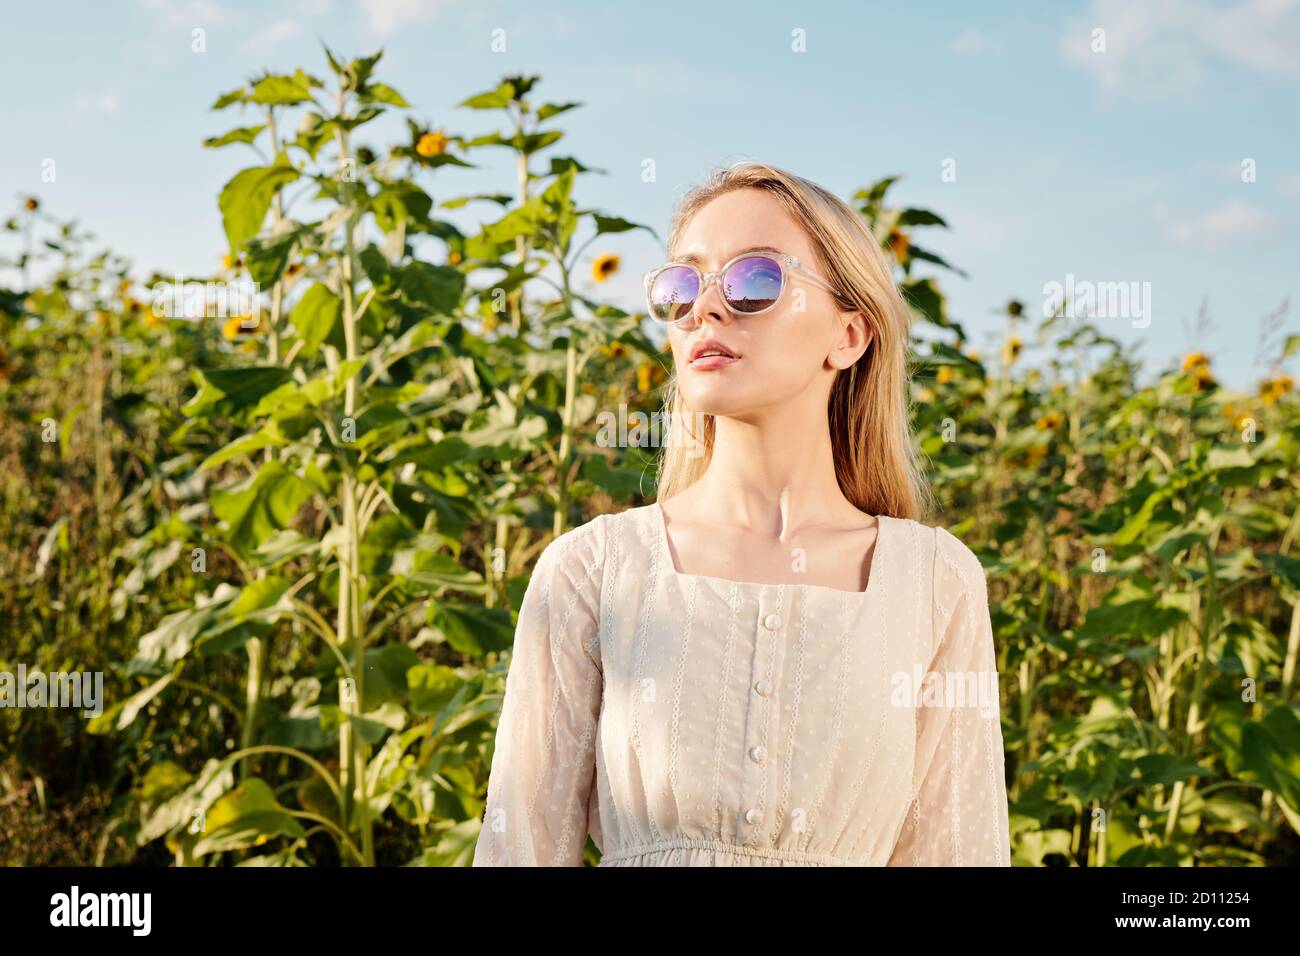 Blond young woman in sunglasses and white dress standing in front of camera Stock Photo